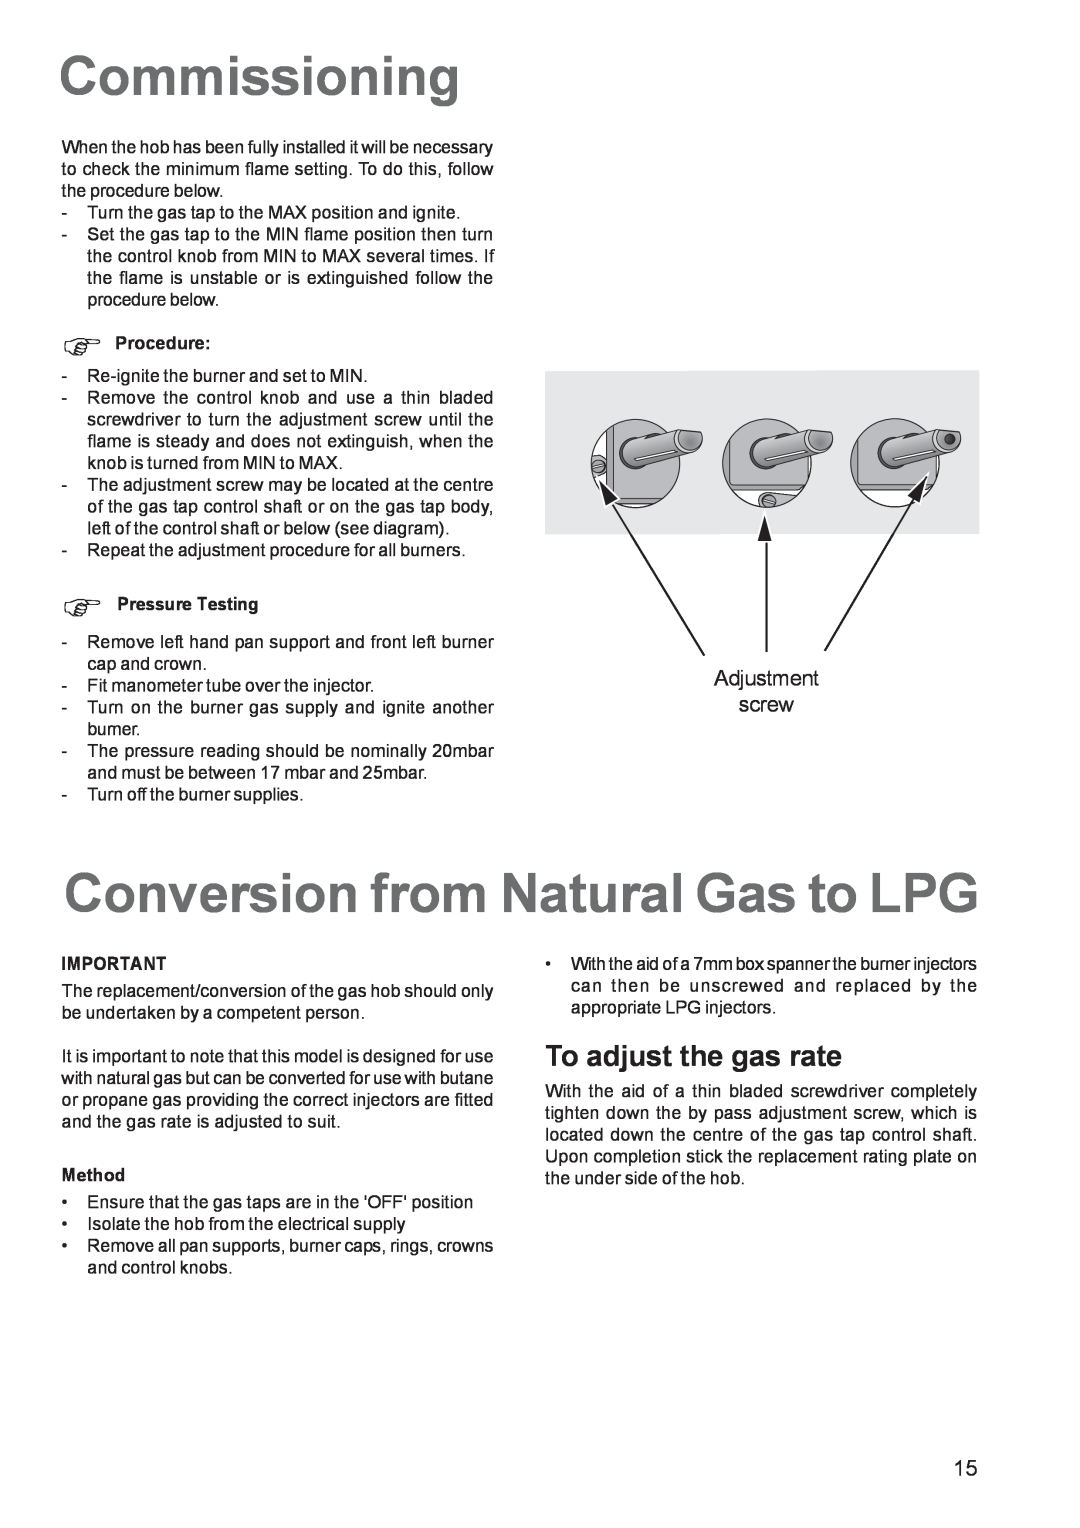 Zanussi ZGF 682 Commissioning, Conversion from Natural Gas to LPG, To adjust the gas rate, Adjustment screw, Procedure 